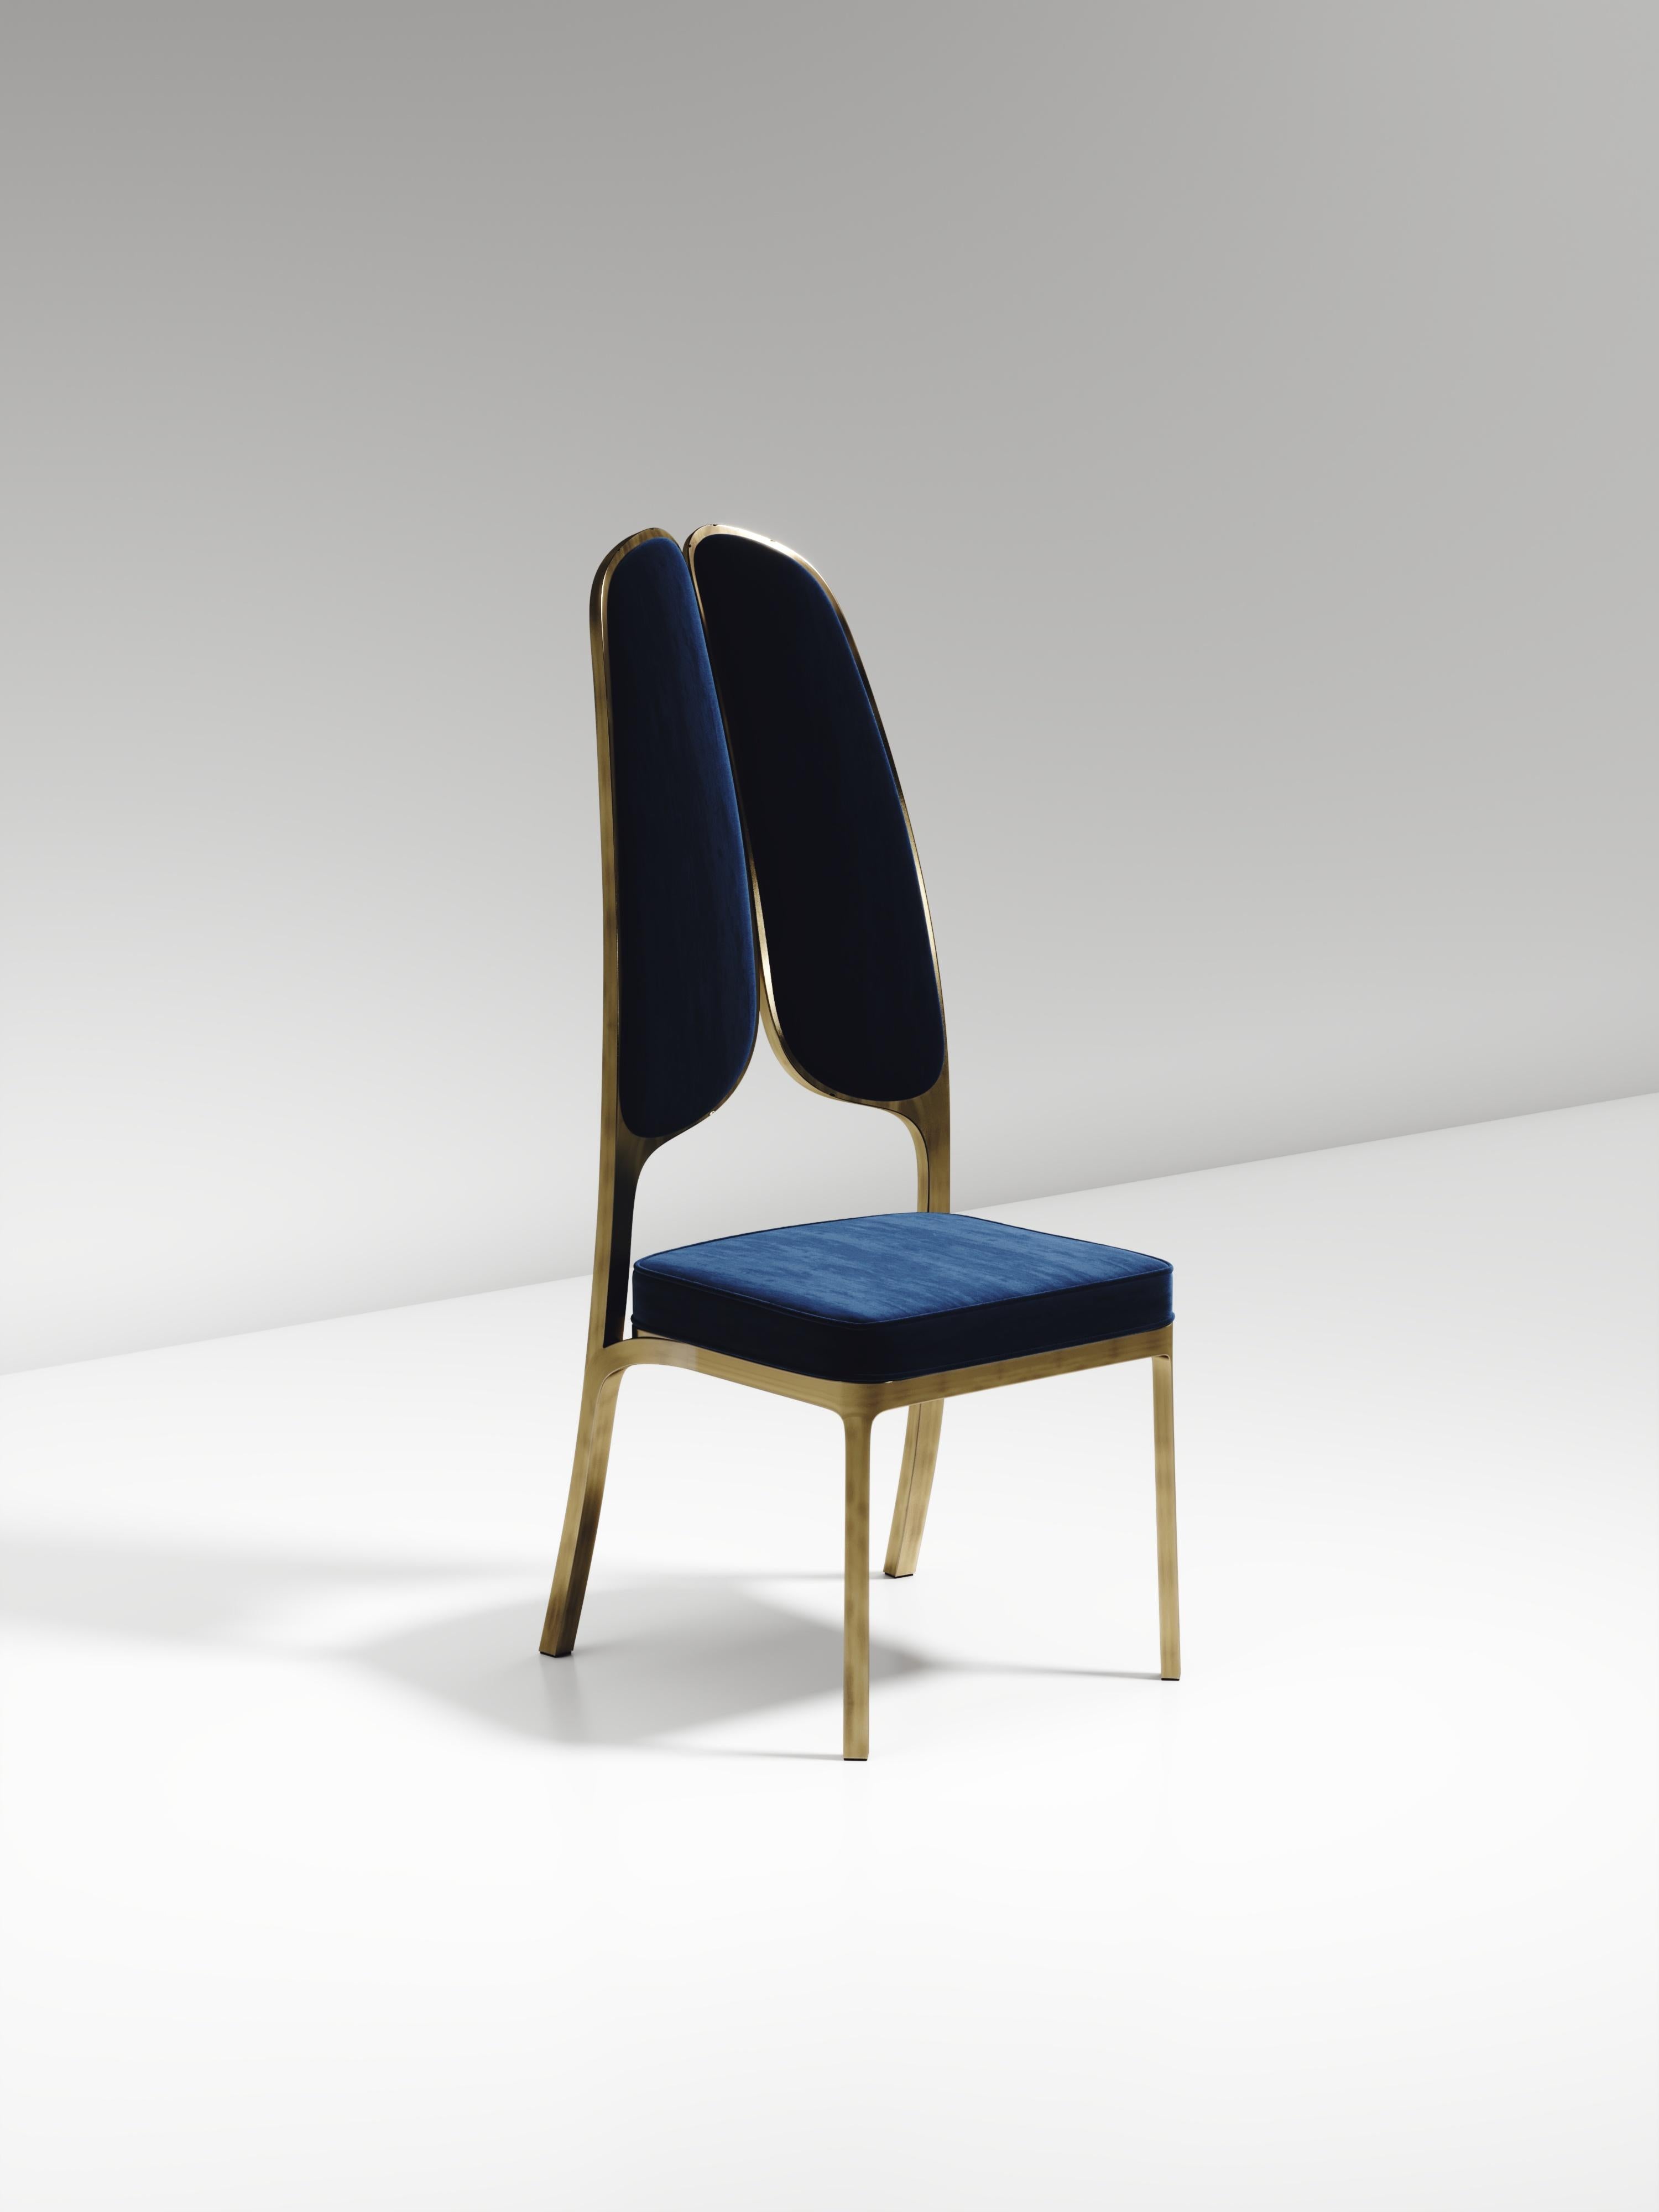 The Gingko dining chair by R & Y Augousti is an elegant and whimsical piece. The blue velvet upholstered piece provides comfort while exuding a playful aesthetic in its abstract nod to a butterfly with the form of its backrest. Available in an